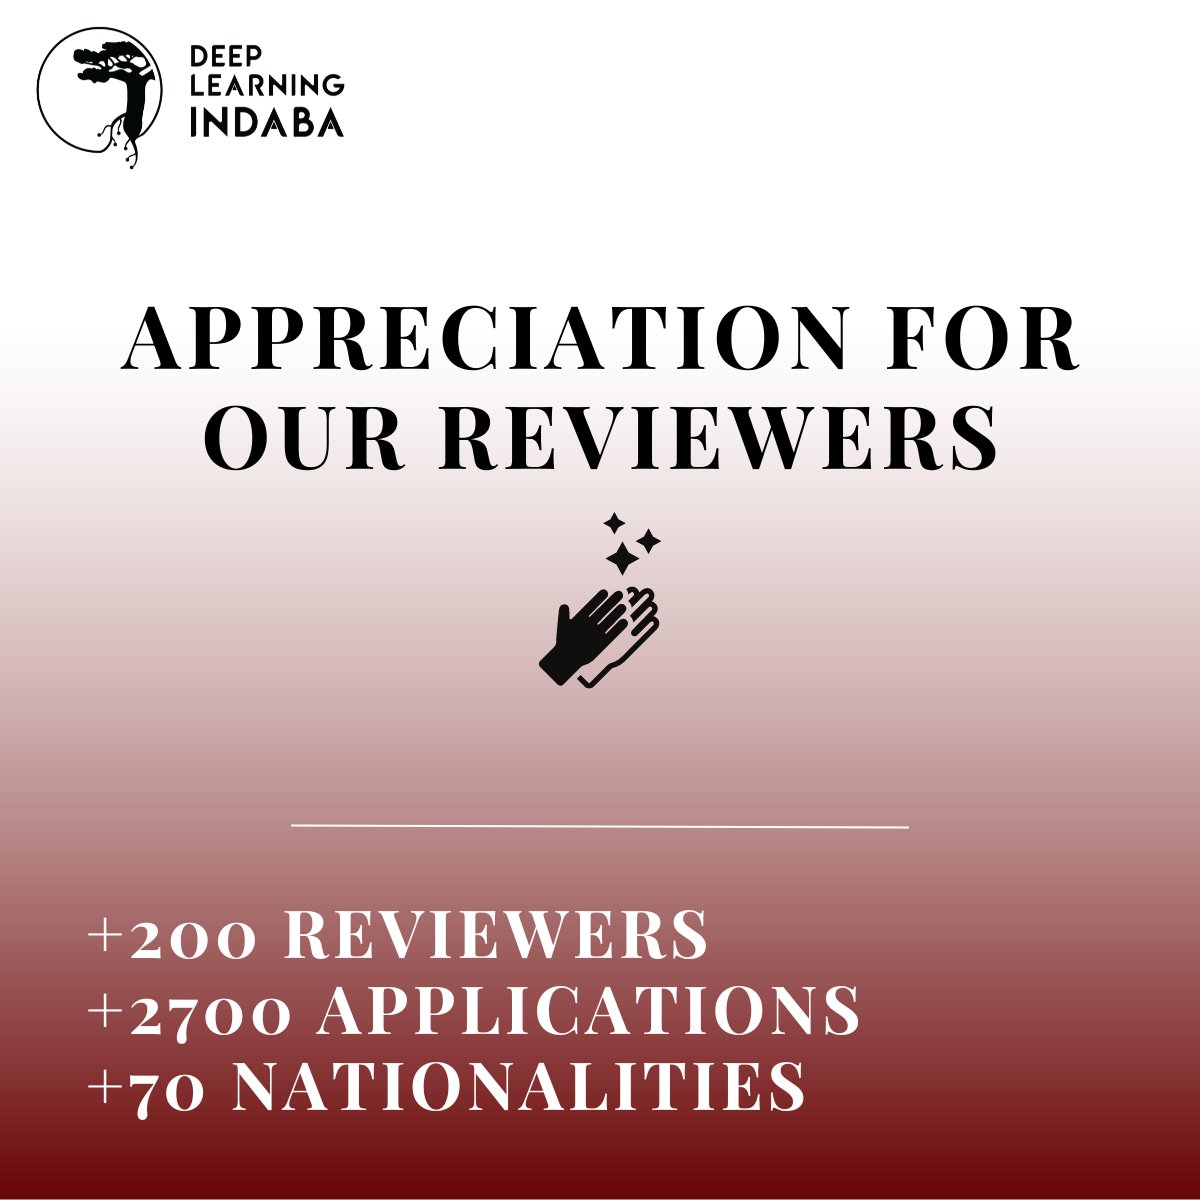 We would like to thank our application reviewers for their outstanding contributions throughout the review phase of the Deep Learning Indaba applications and for their commitment ensuring a fair and inclusive selection process.🫶⭐ This year, we received over 2700 applications…